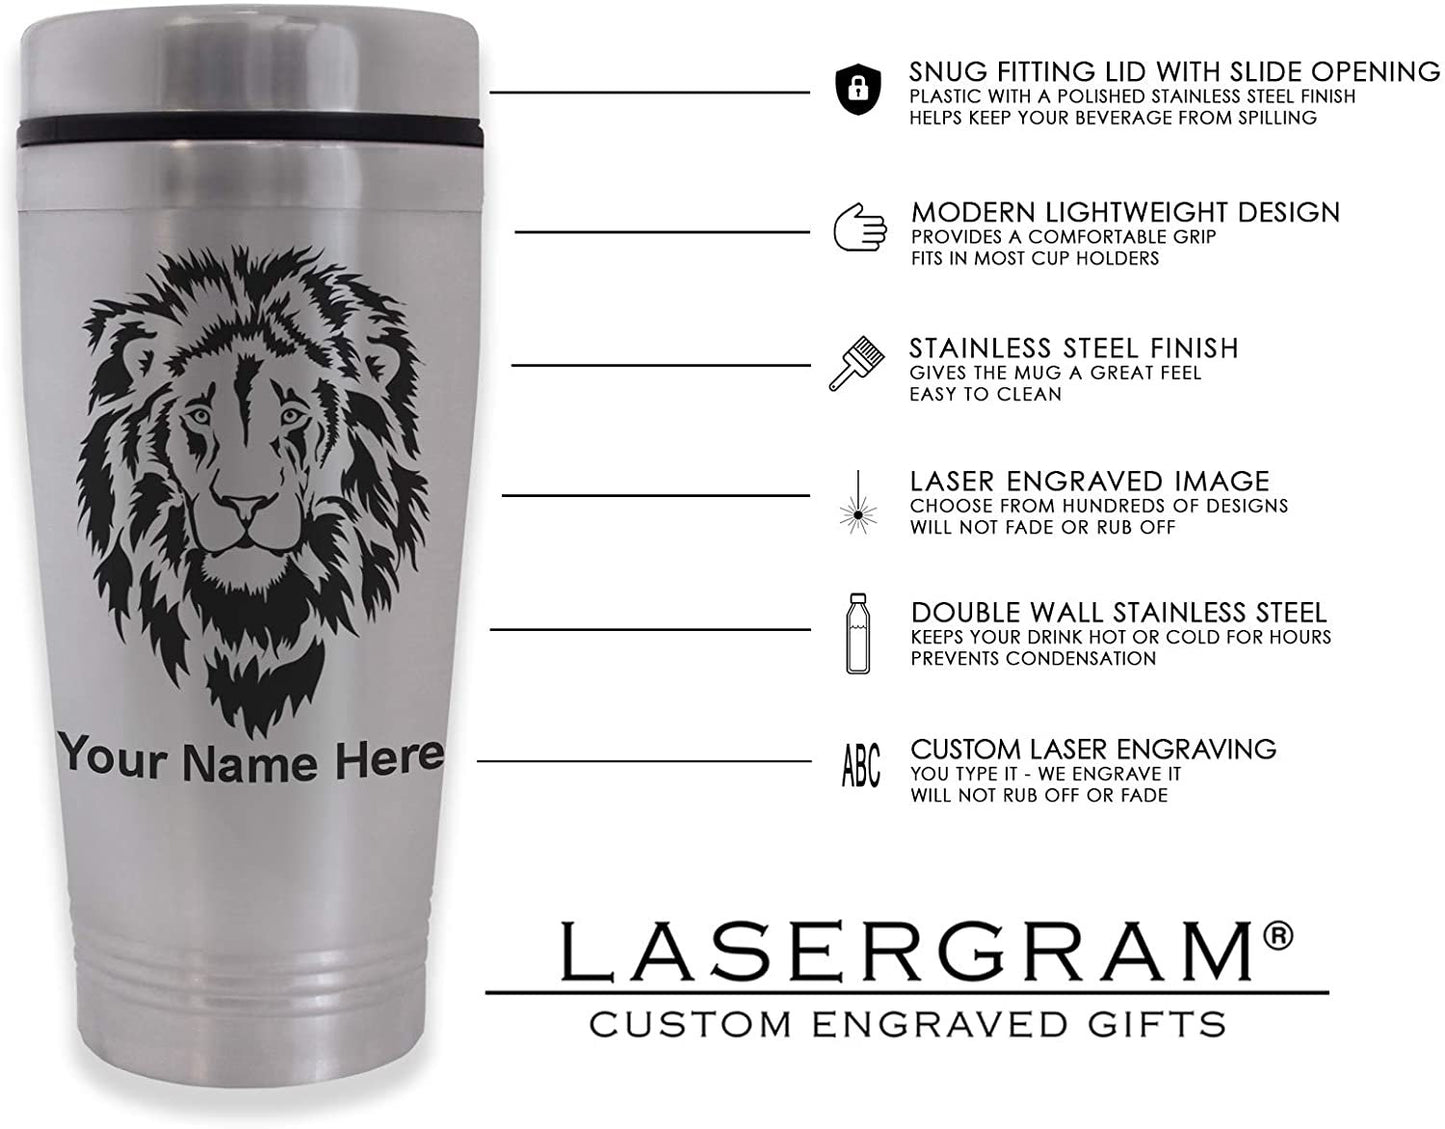 Commuter Travel Mug, Low Wing Airplane, Personalized Engraving Included